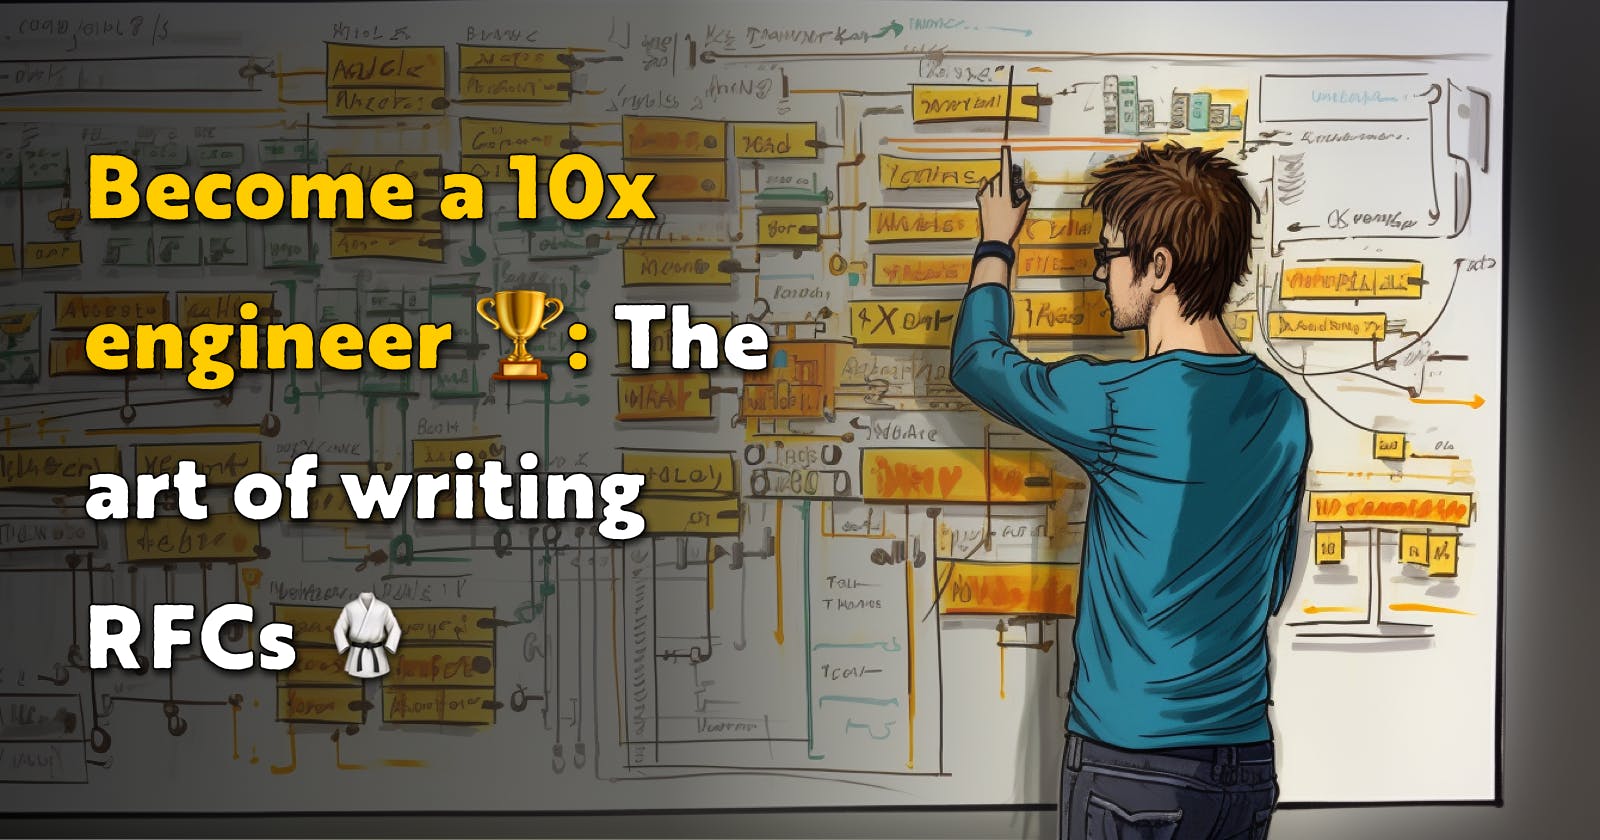 Develop the right thing every time and become a 10x engineer 🏆: The art of writing RFCs 🥋